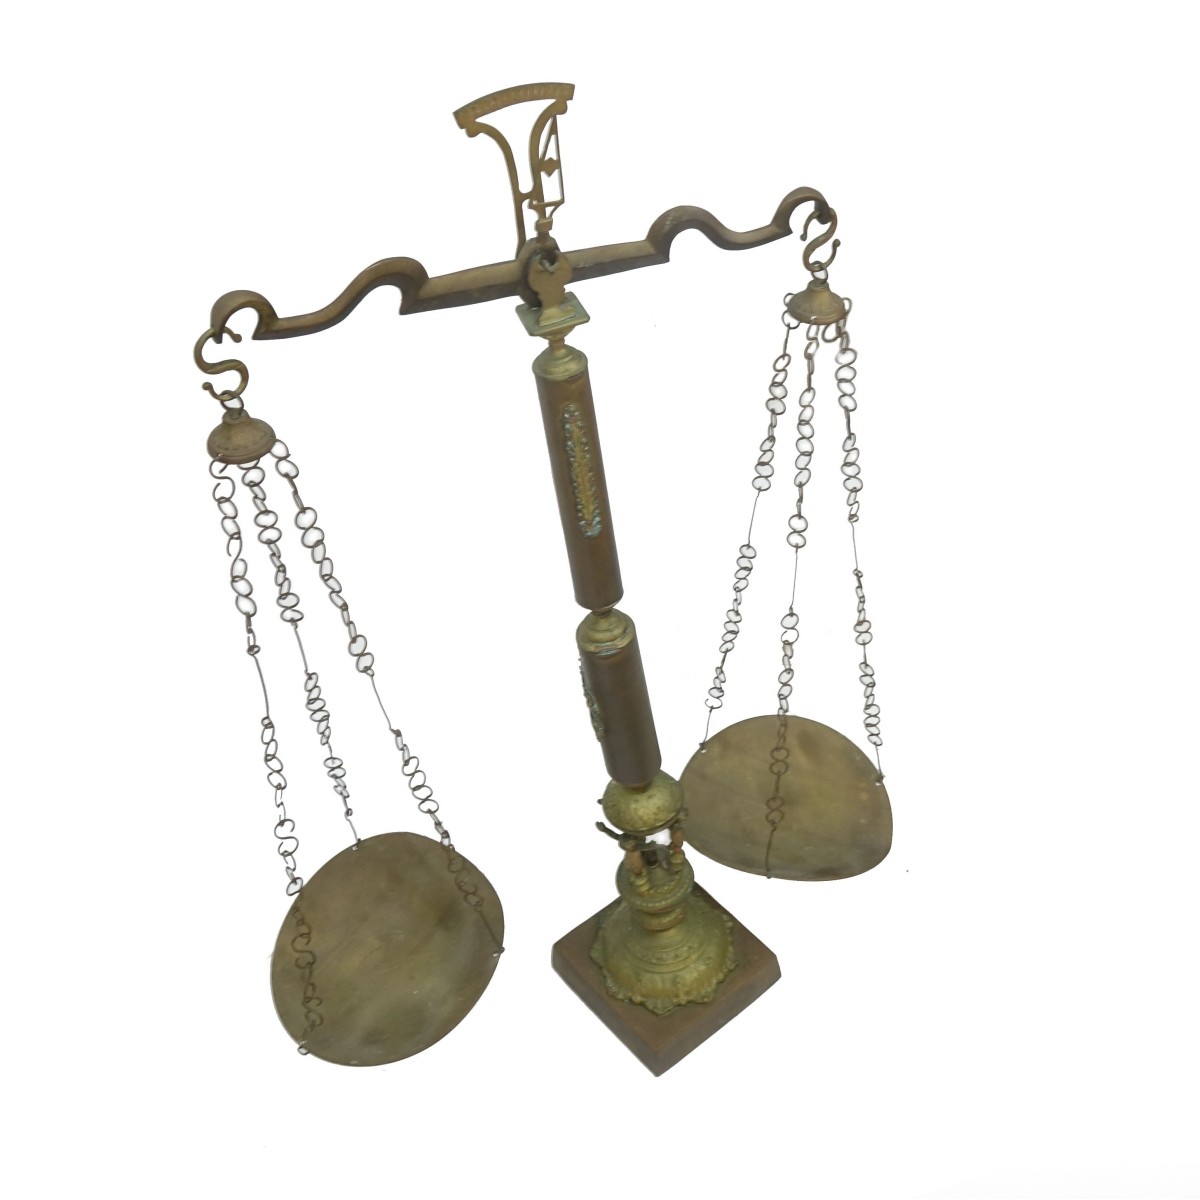 Vintage Brass Standing Scale